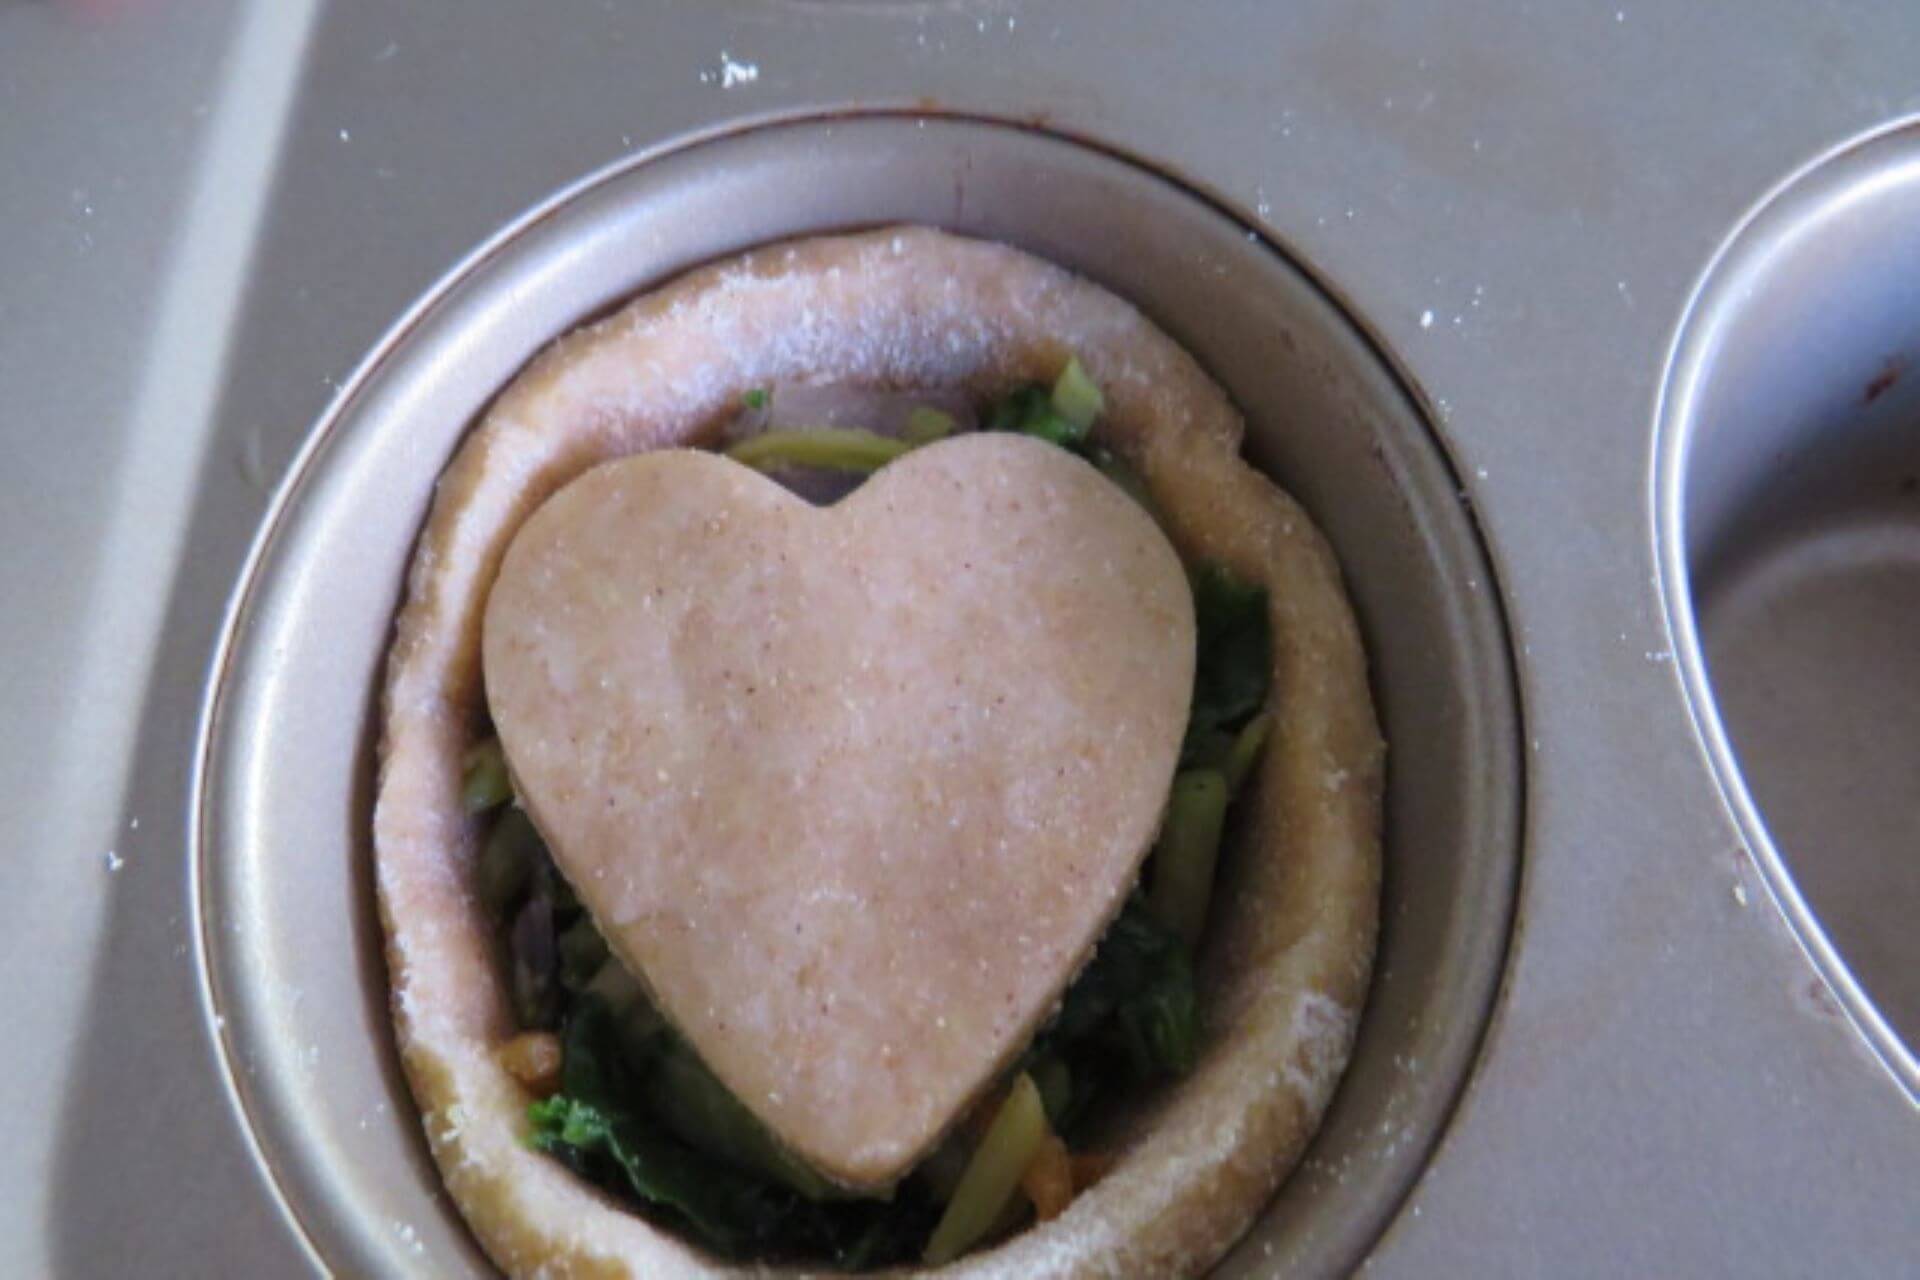 spinach pastries recipe with a small heart cut out of pastry on top